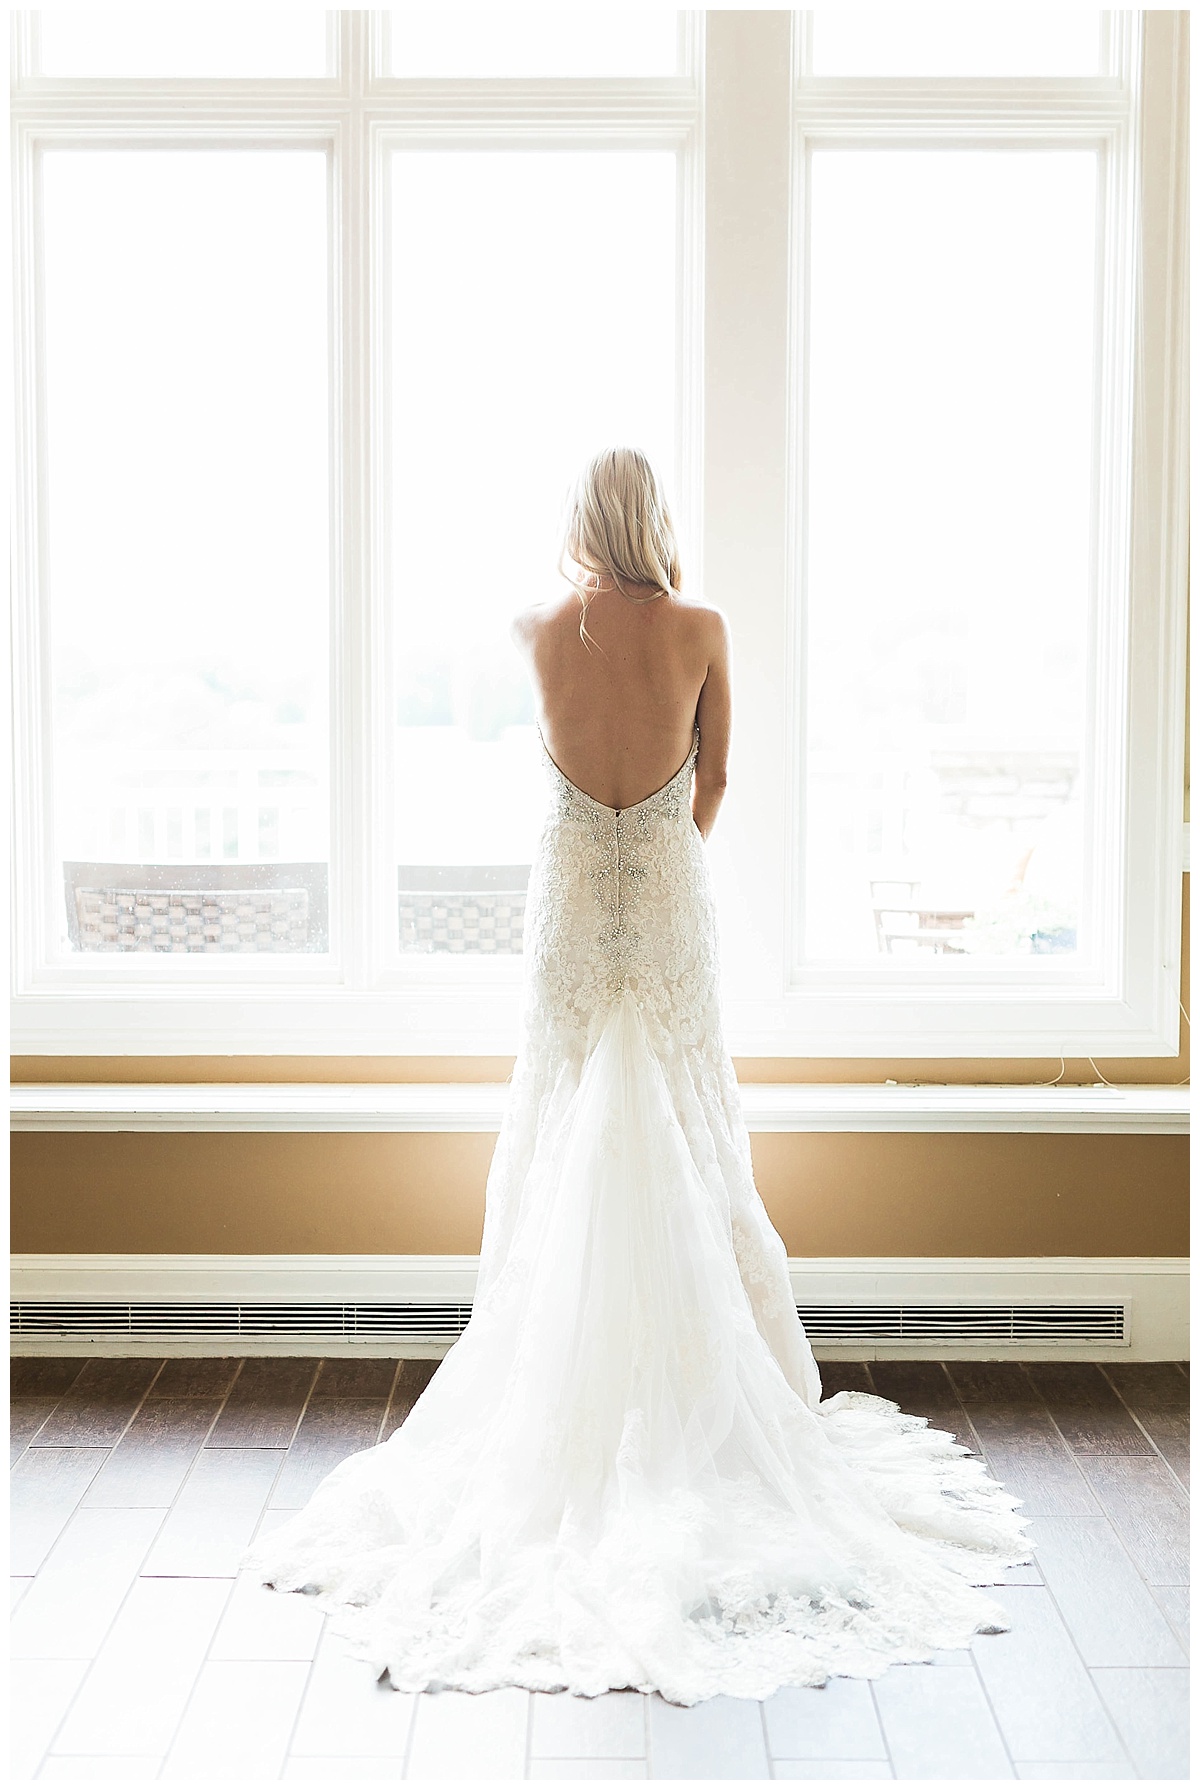 Davenport Country Club Wedding | Wedding Venues in the Quad Cities | Sarah Sunstrom Photography_0011.jpg